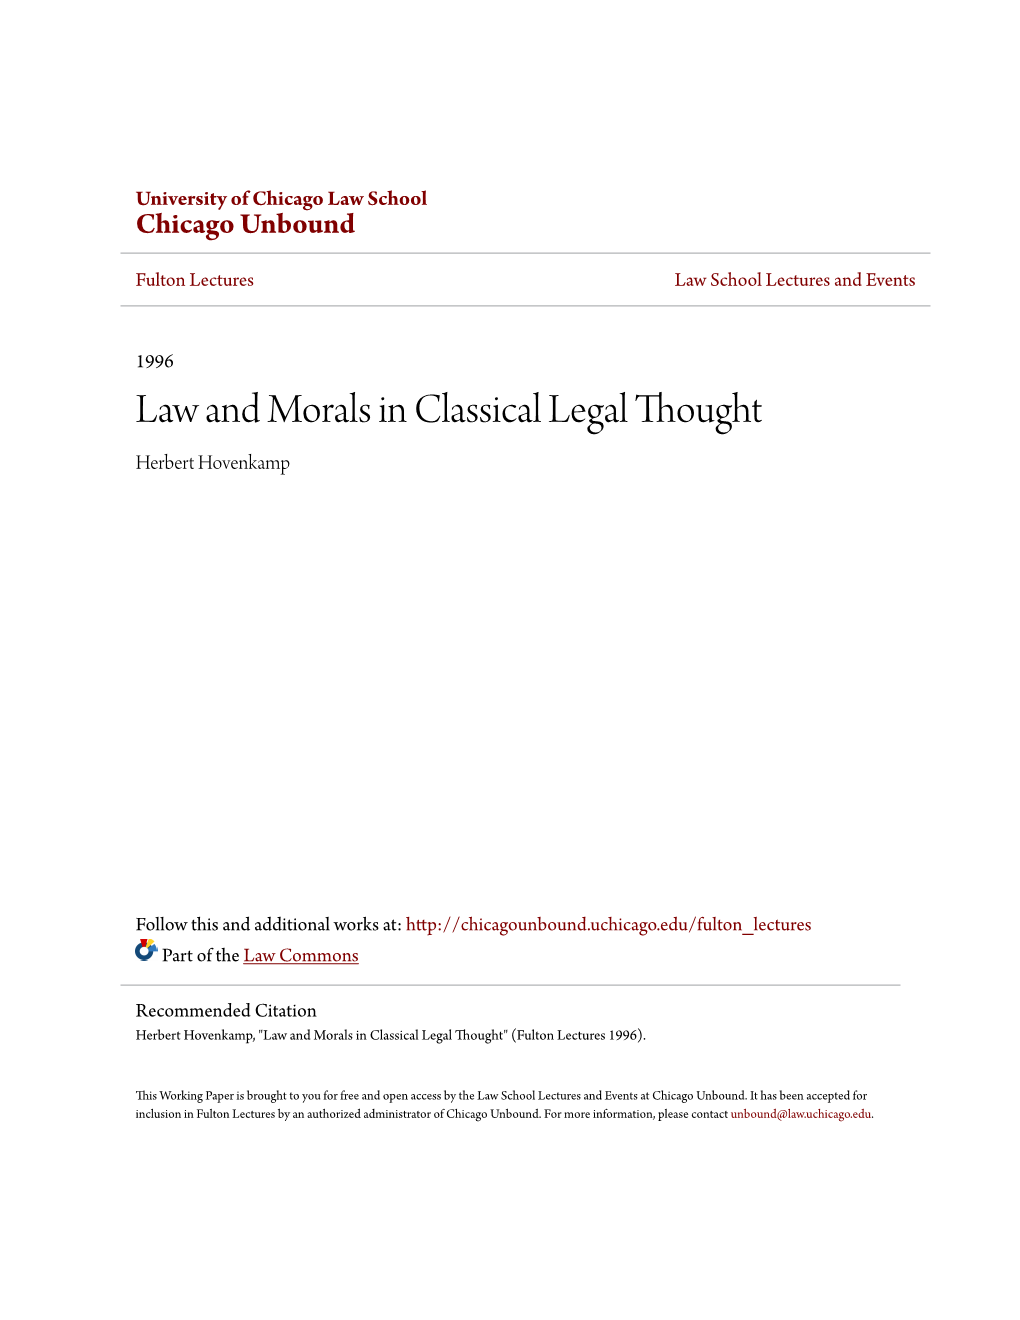 Law and Morals in Classical Legal Thought Herbert Hovenkamp